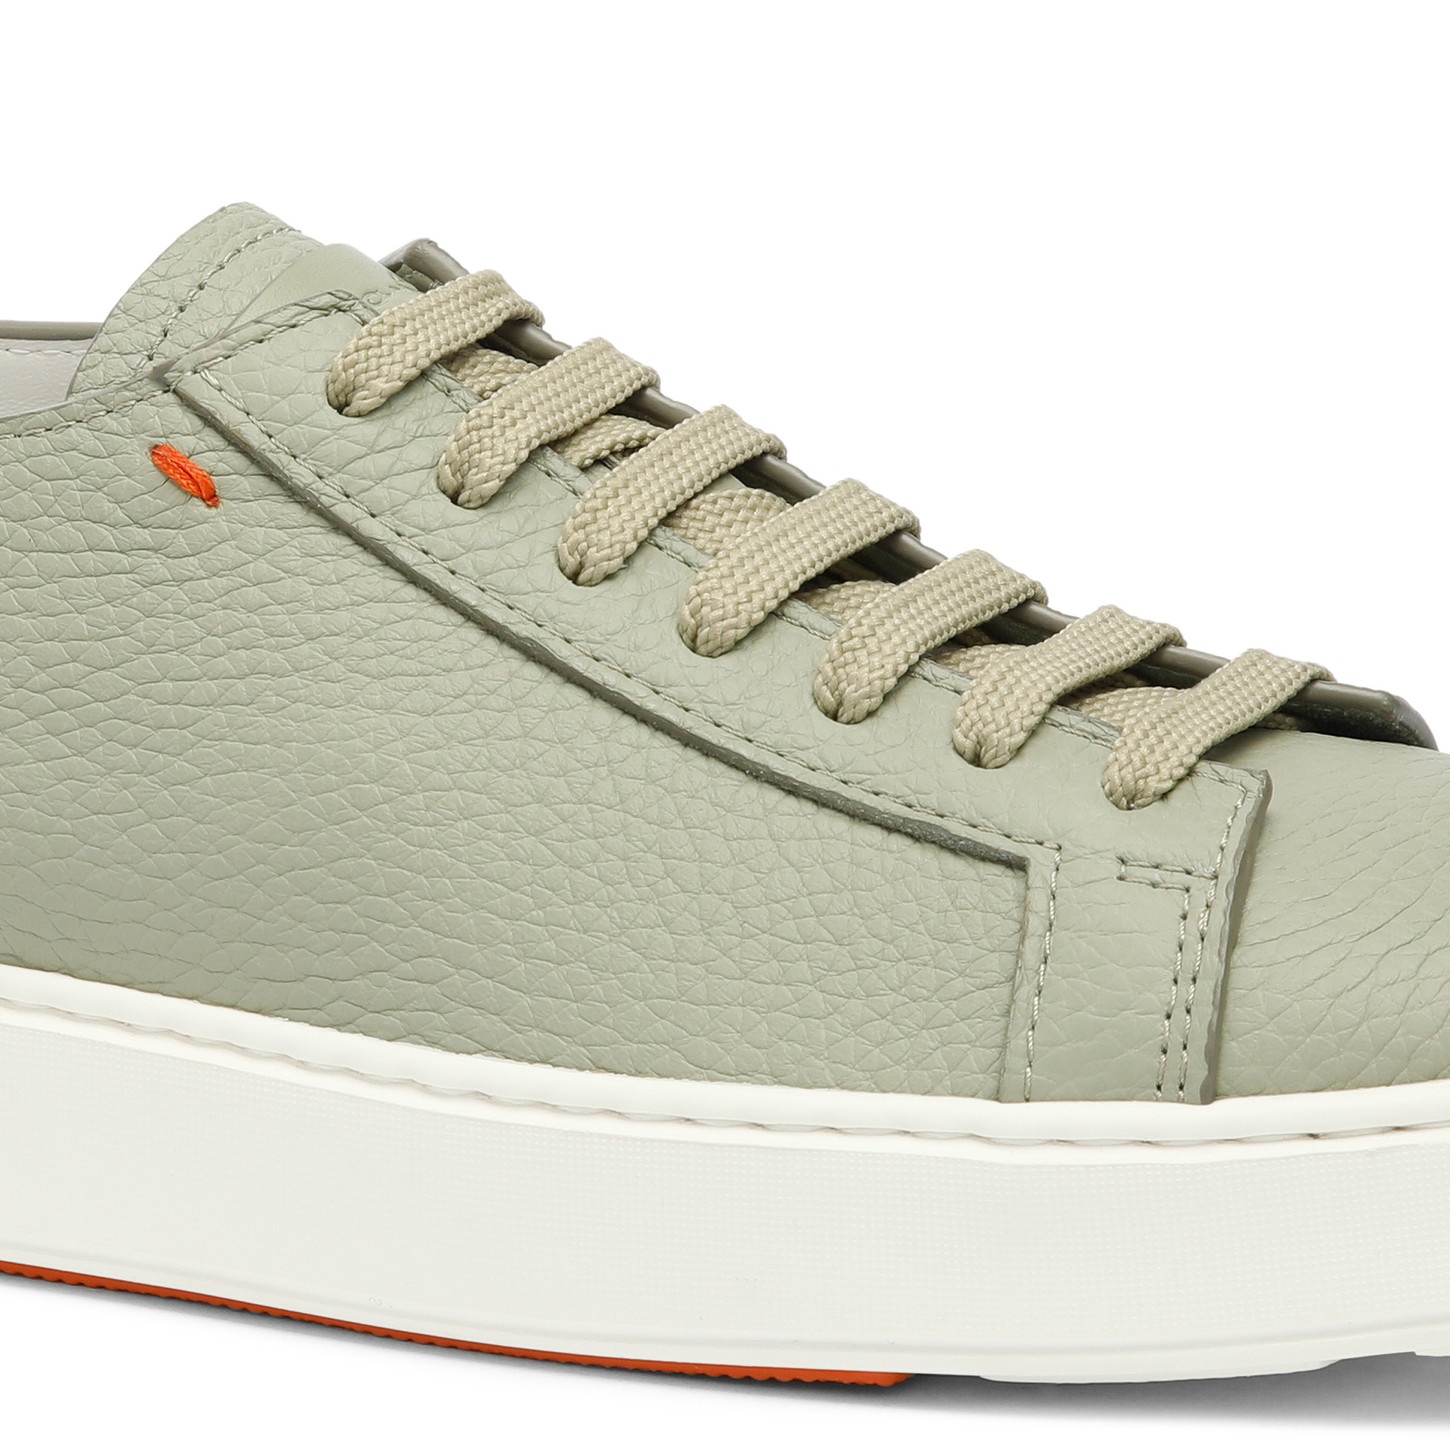 Men's green tumbled leather sneaker - 6